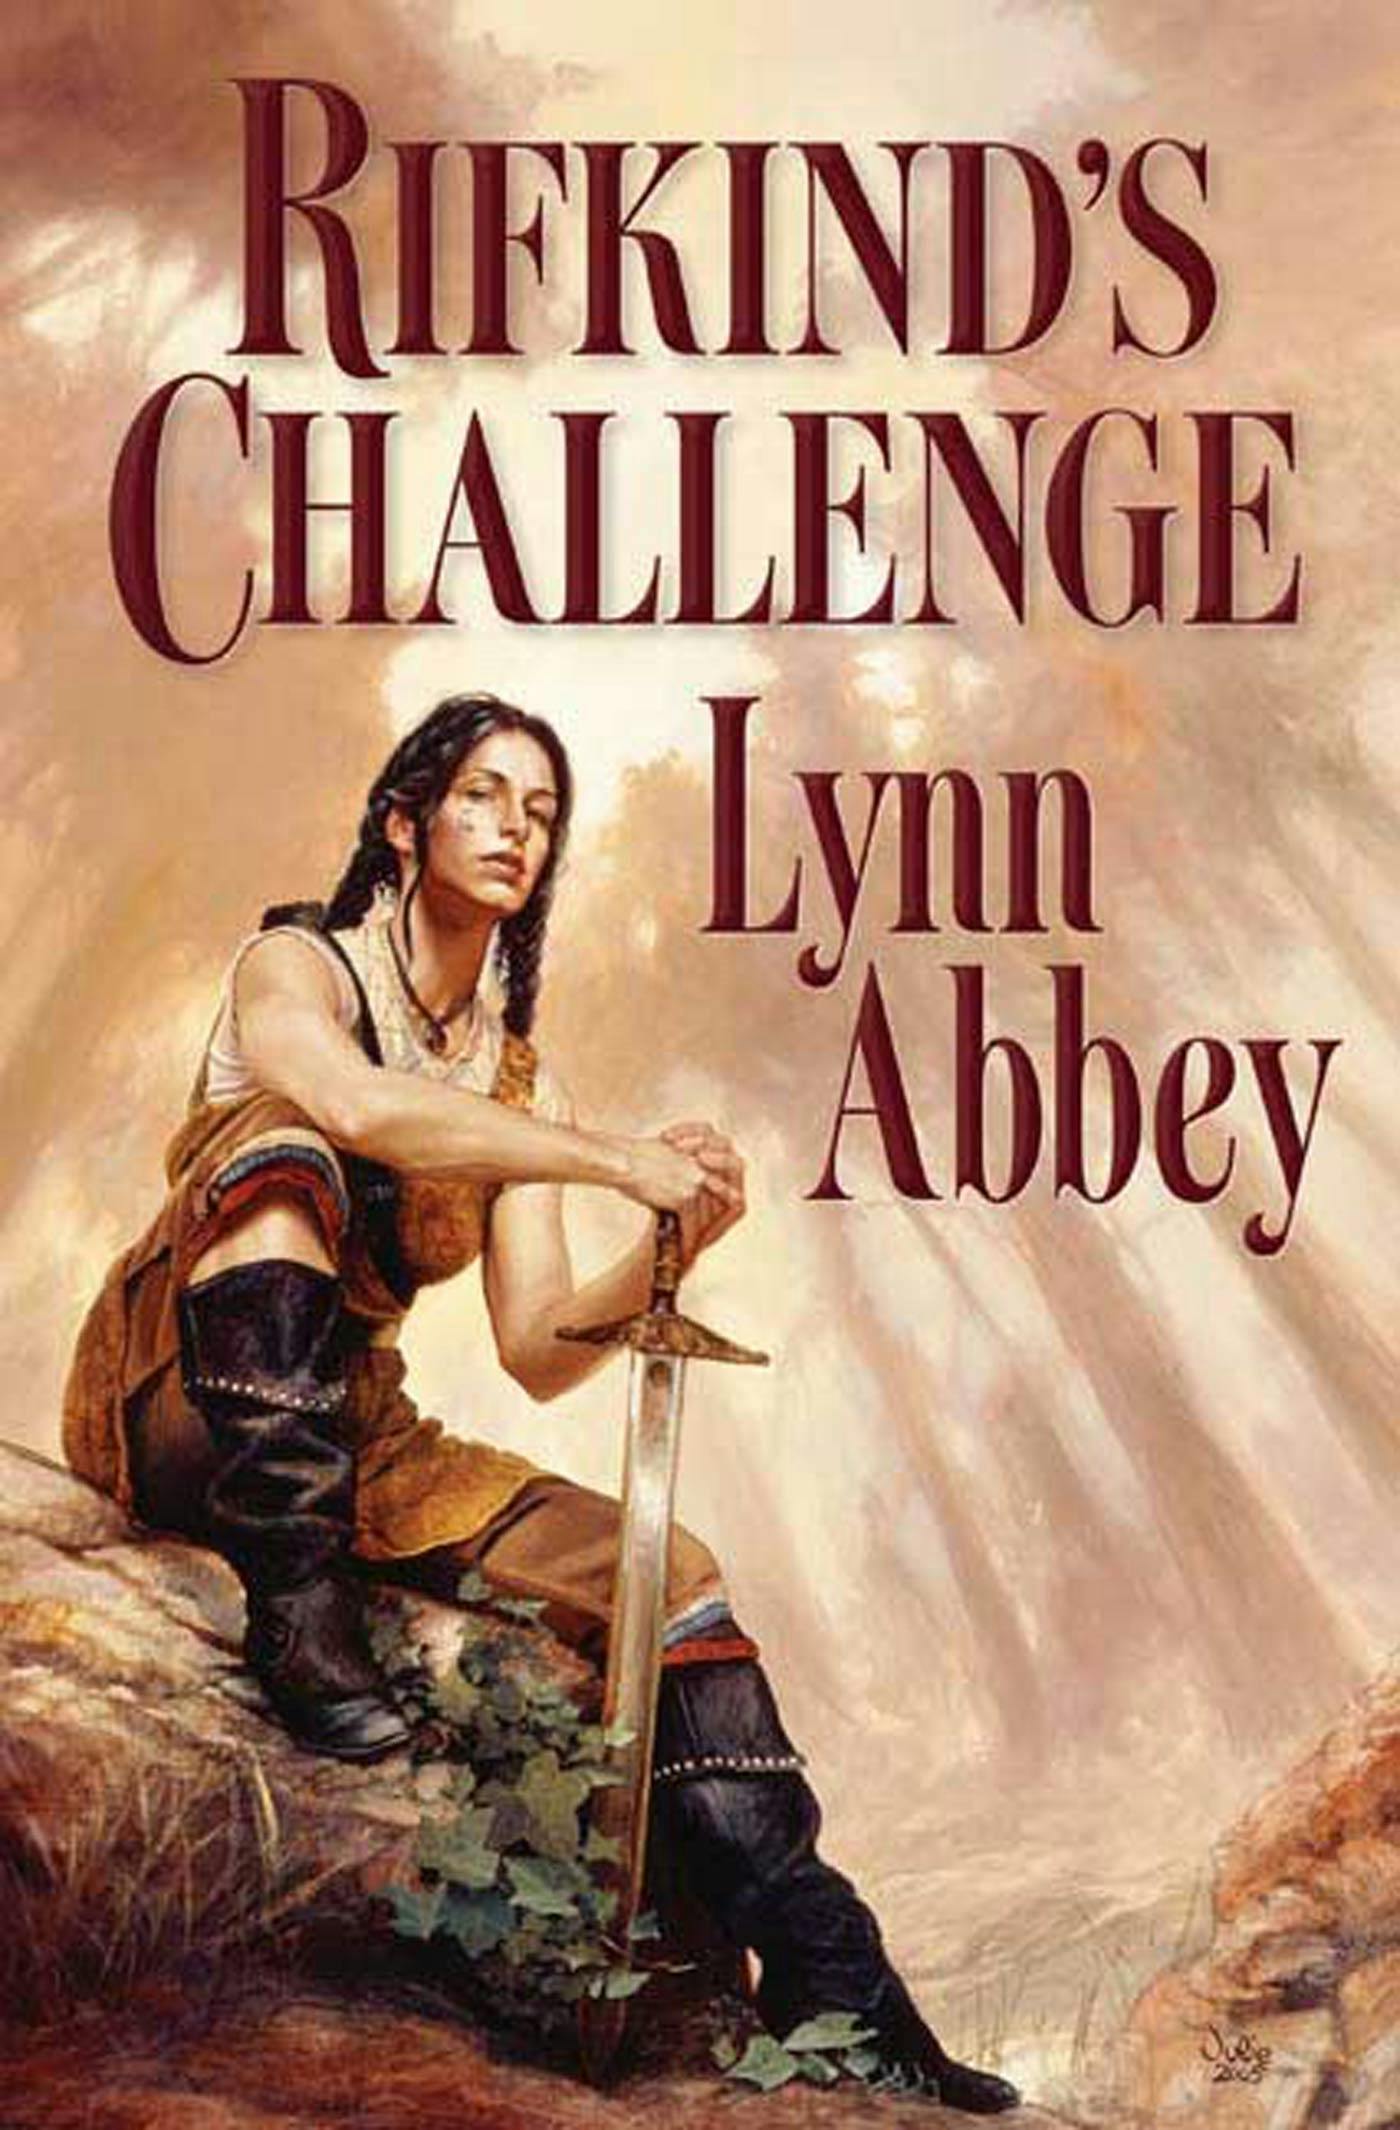 Cover for the book titled as: Rifkind's Challenge